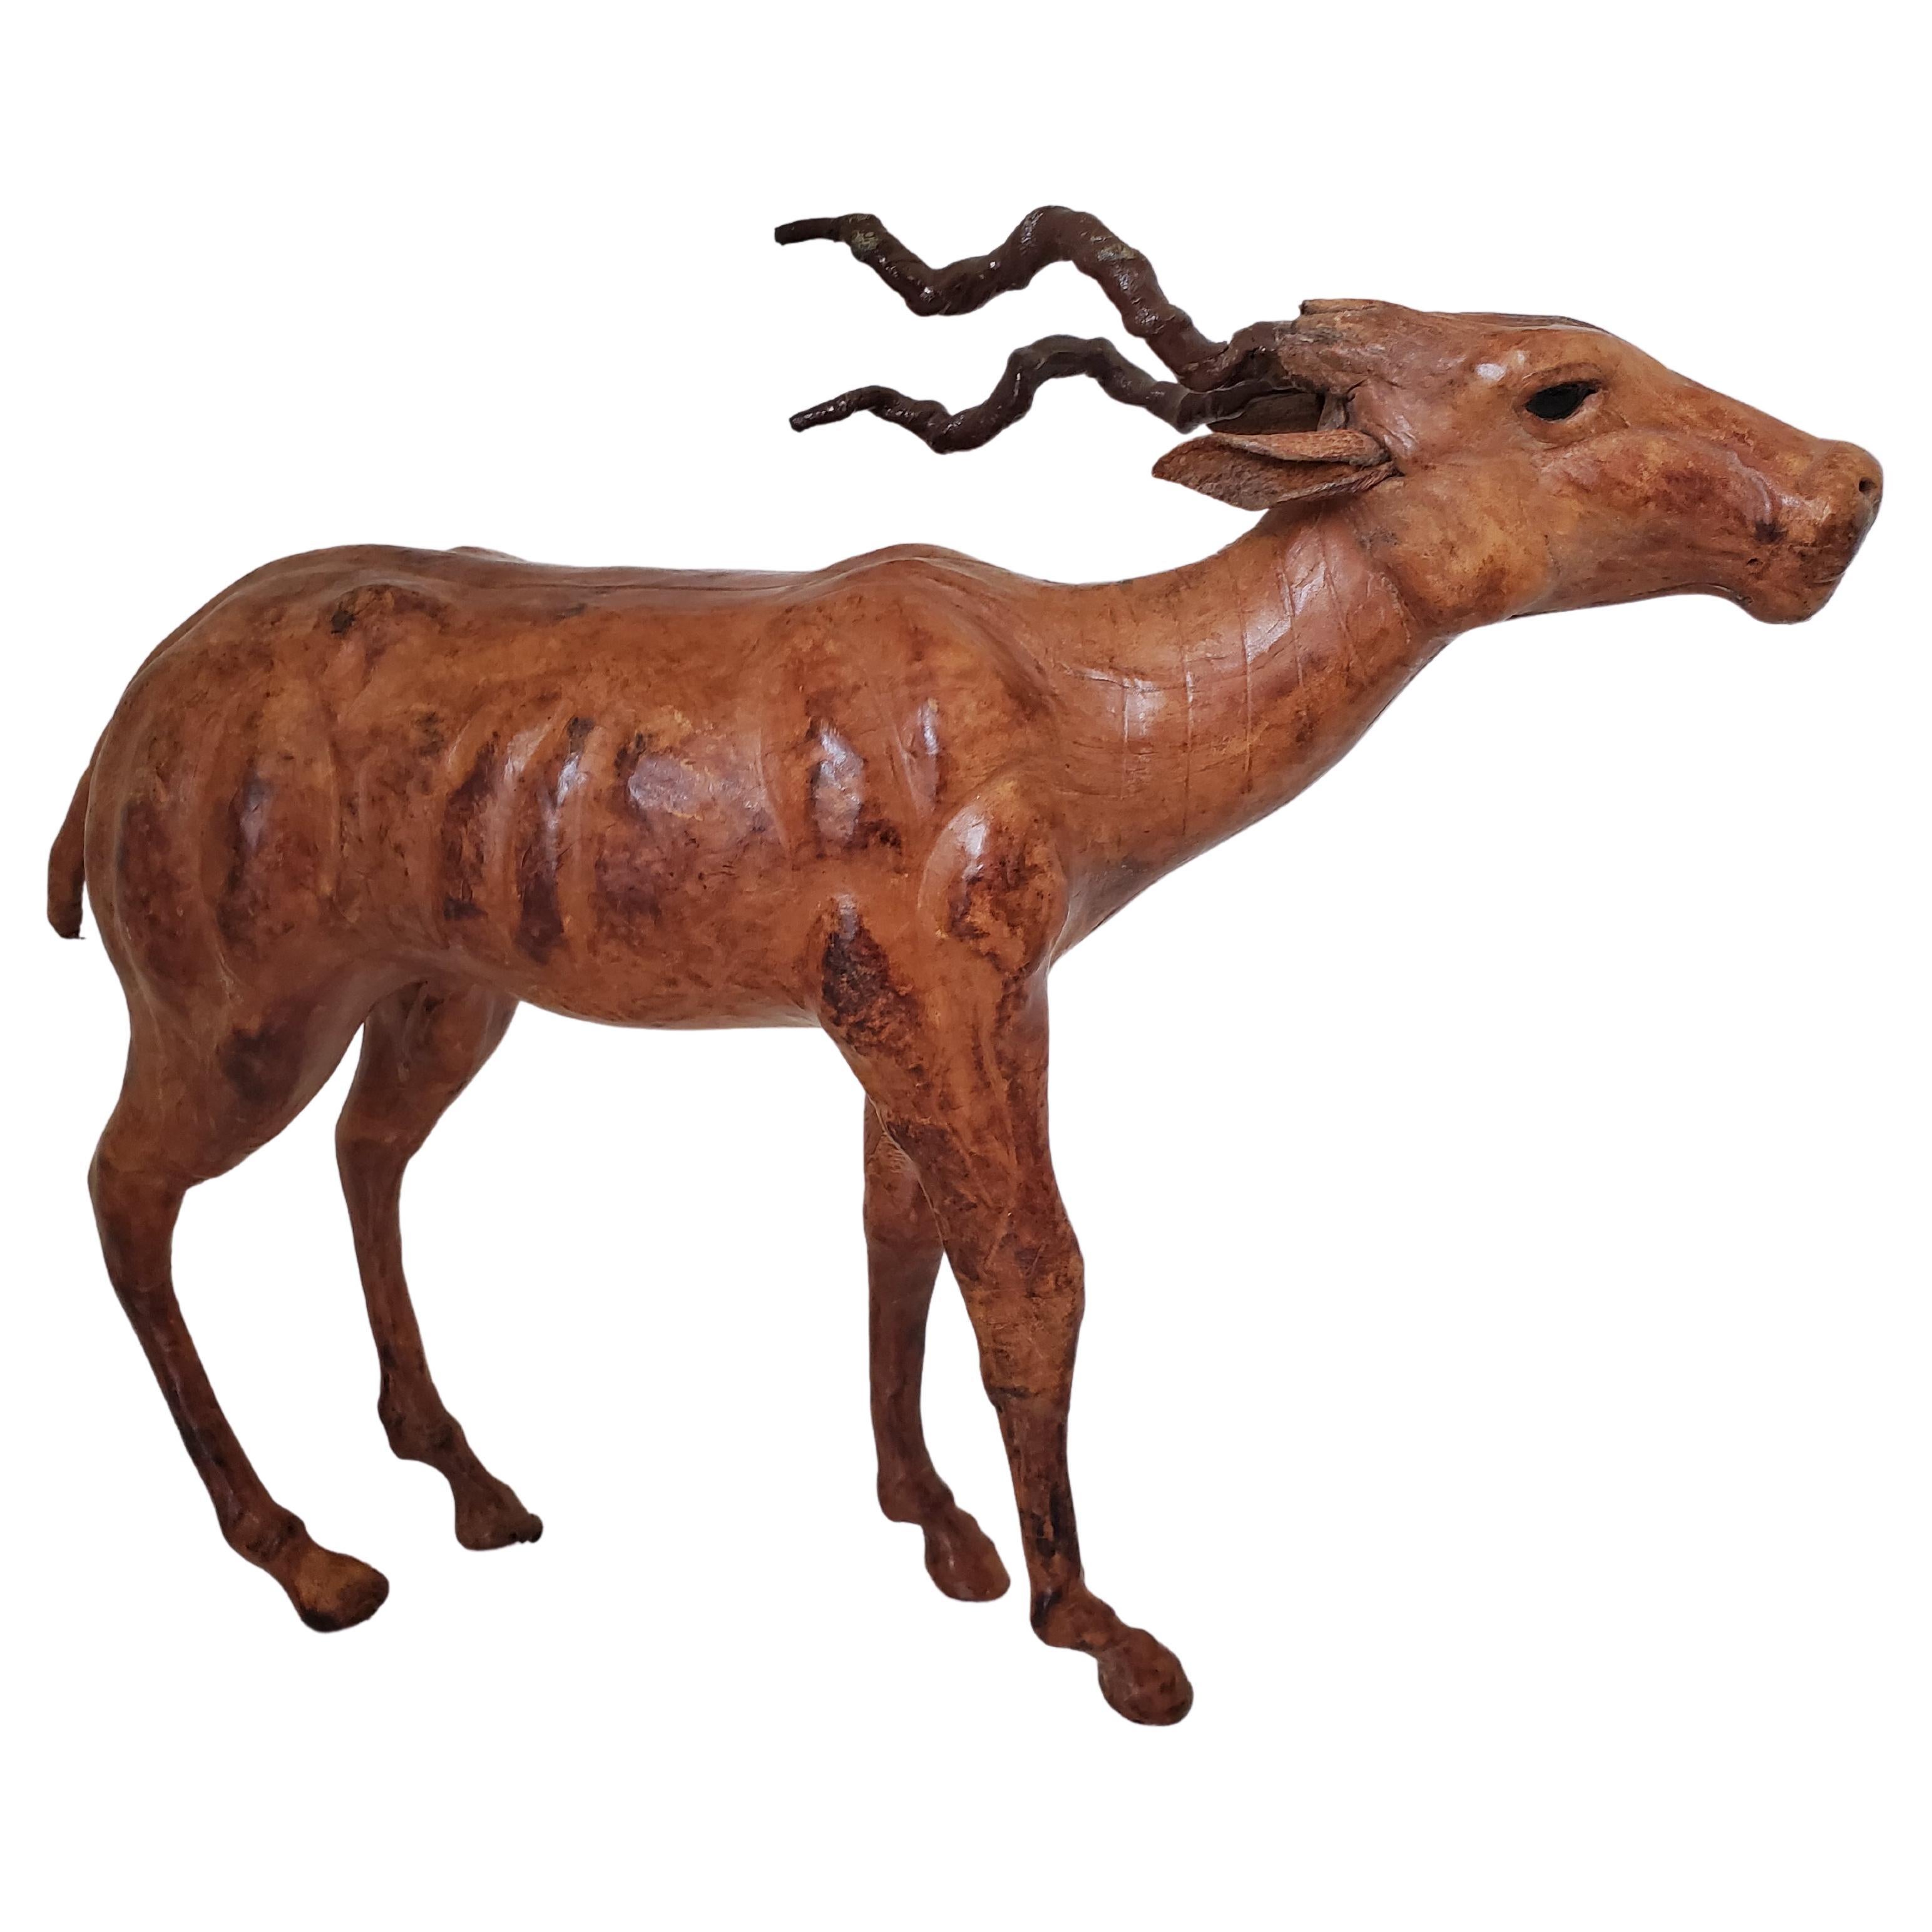 This vintage wood and leather animal sculpture from the early 20th century is likely from Liberty's London. This sculpture, hand carved in wood and clad in leather, depicts a lifelike gazelle that exudes grace in form, stance, and proportion. The